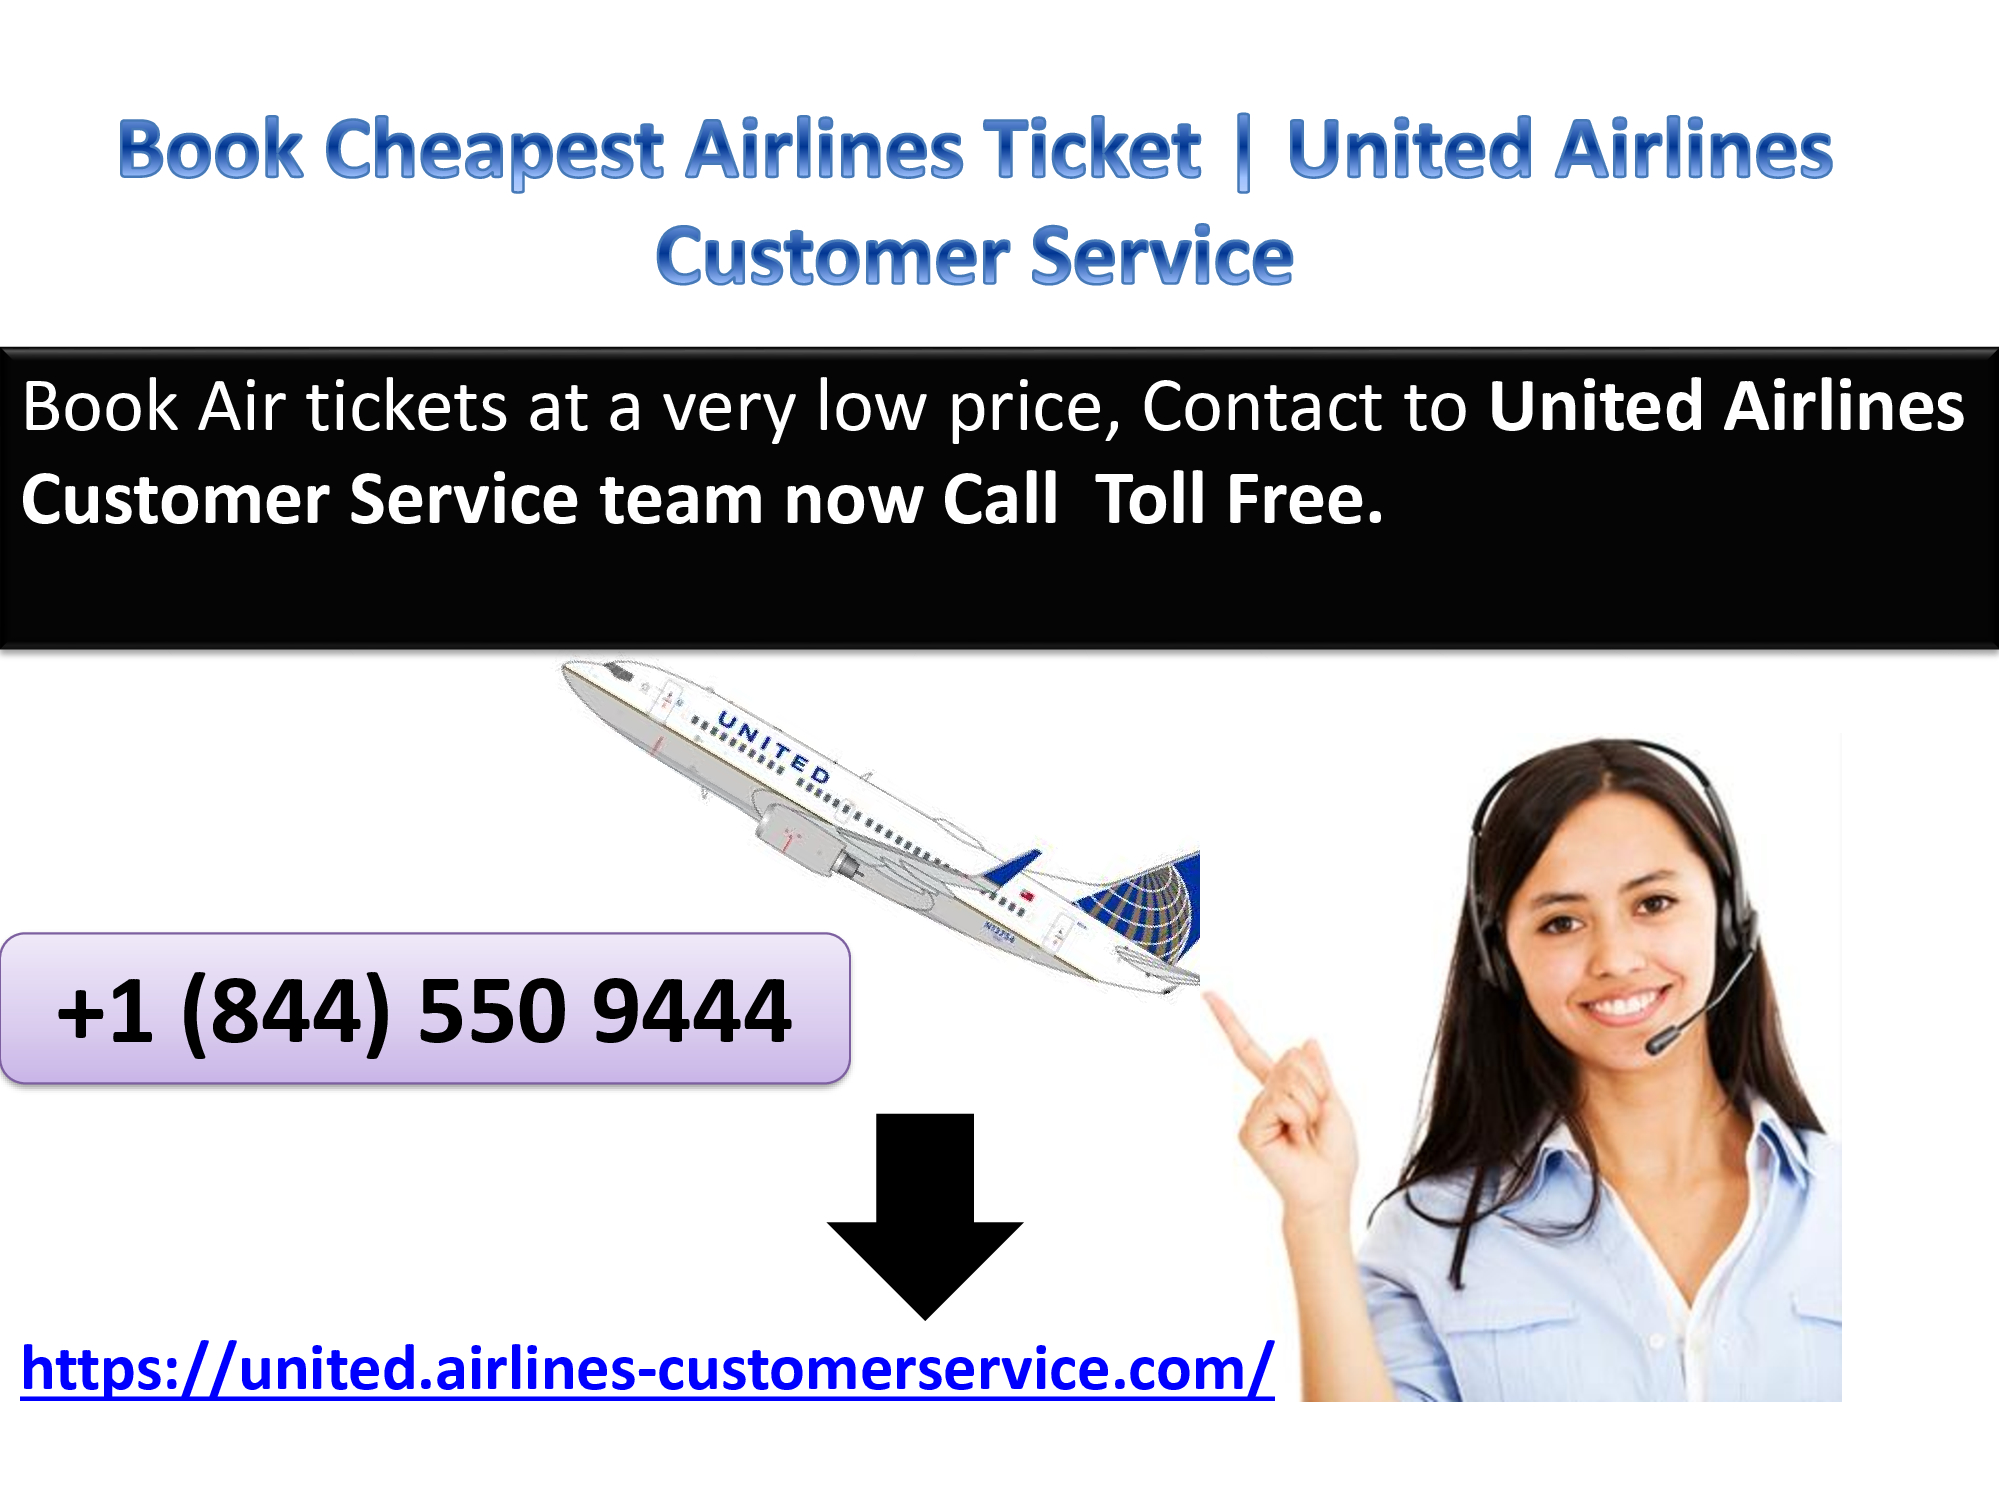 Airlines Customer Service Number.